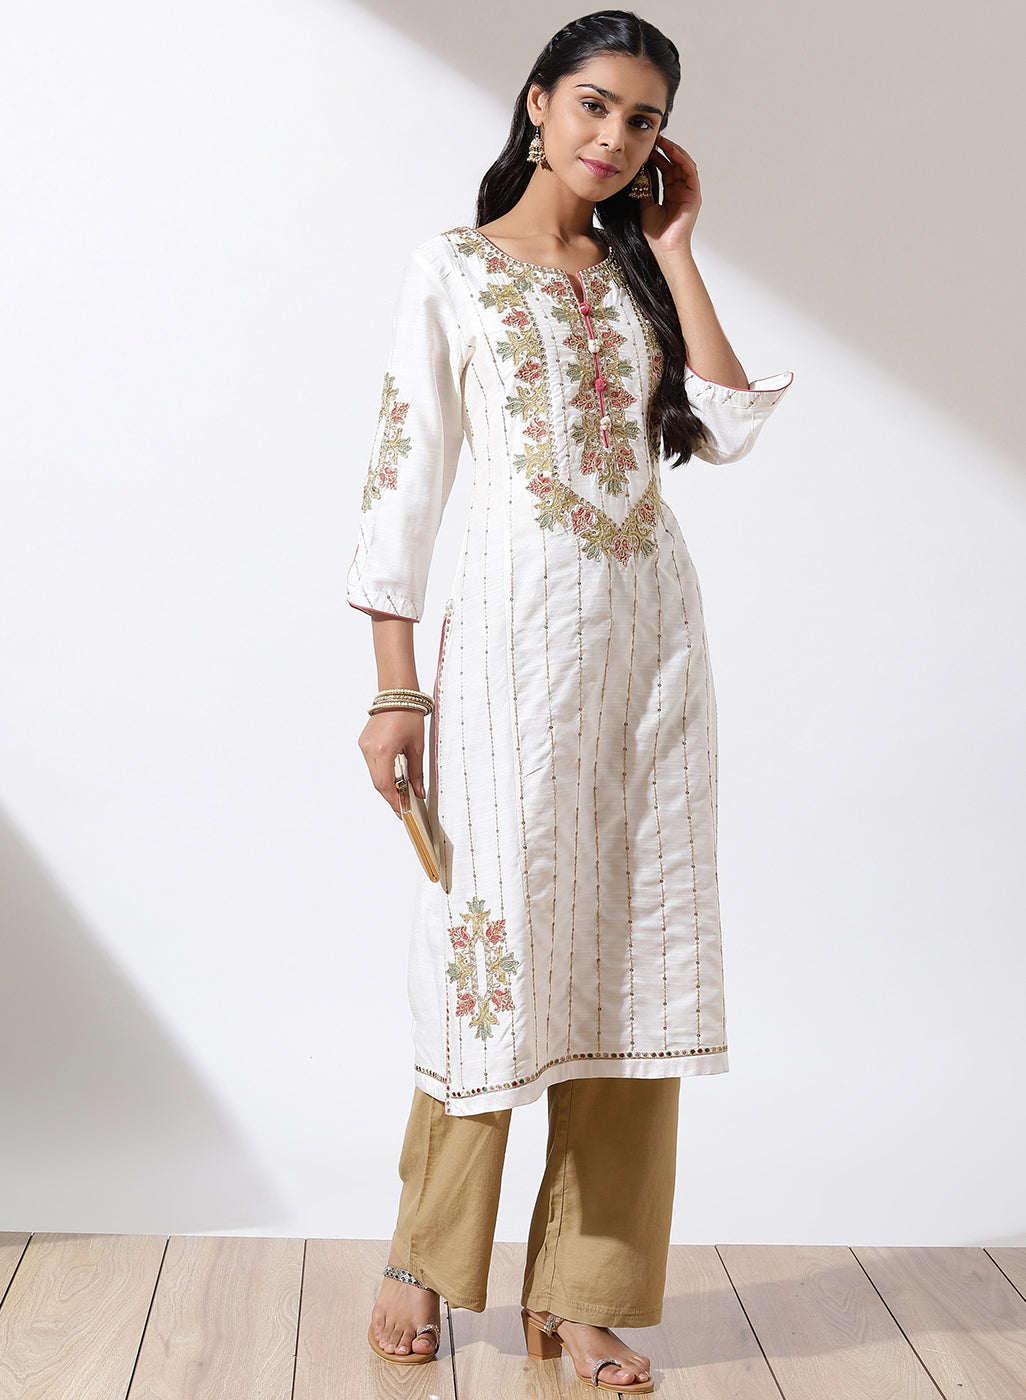 Pearl White Kurta With Delicate Embroidery